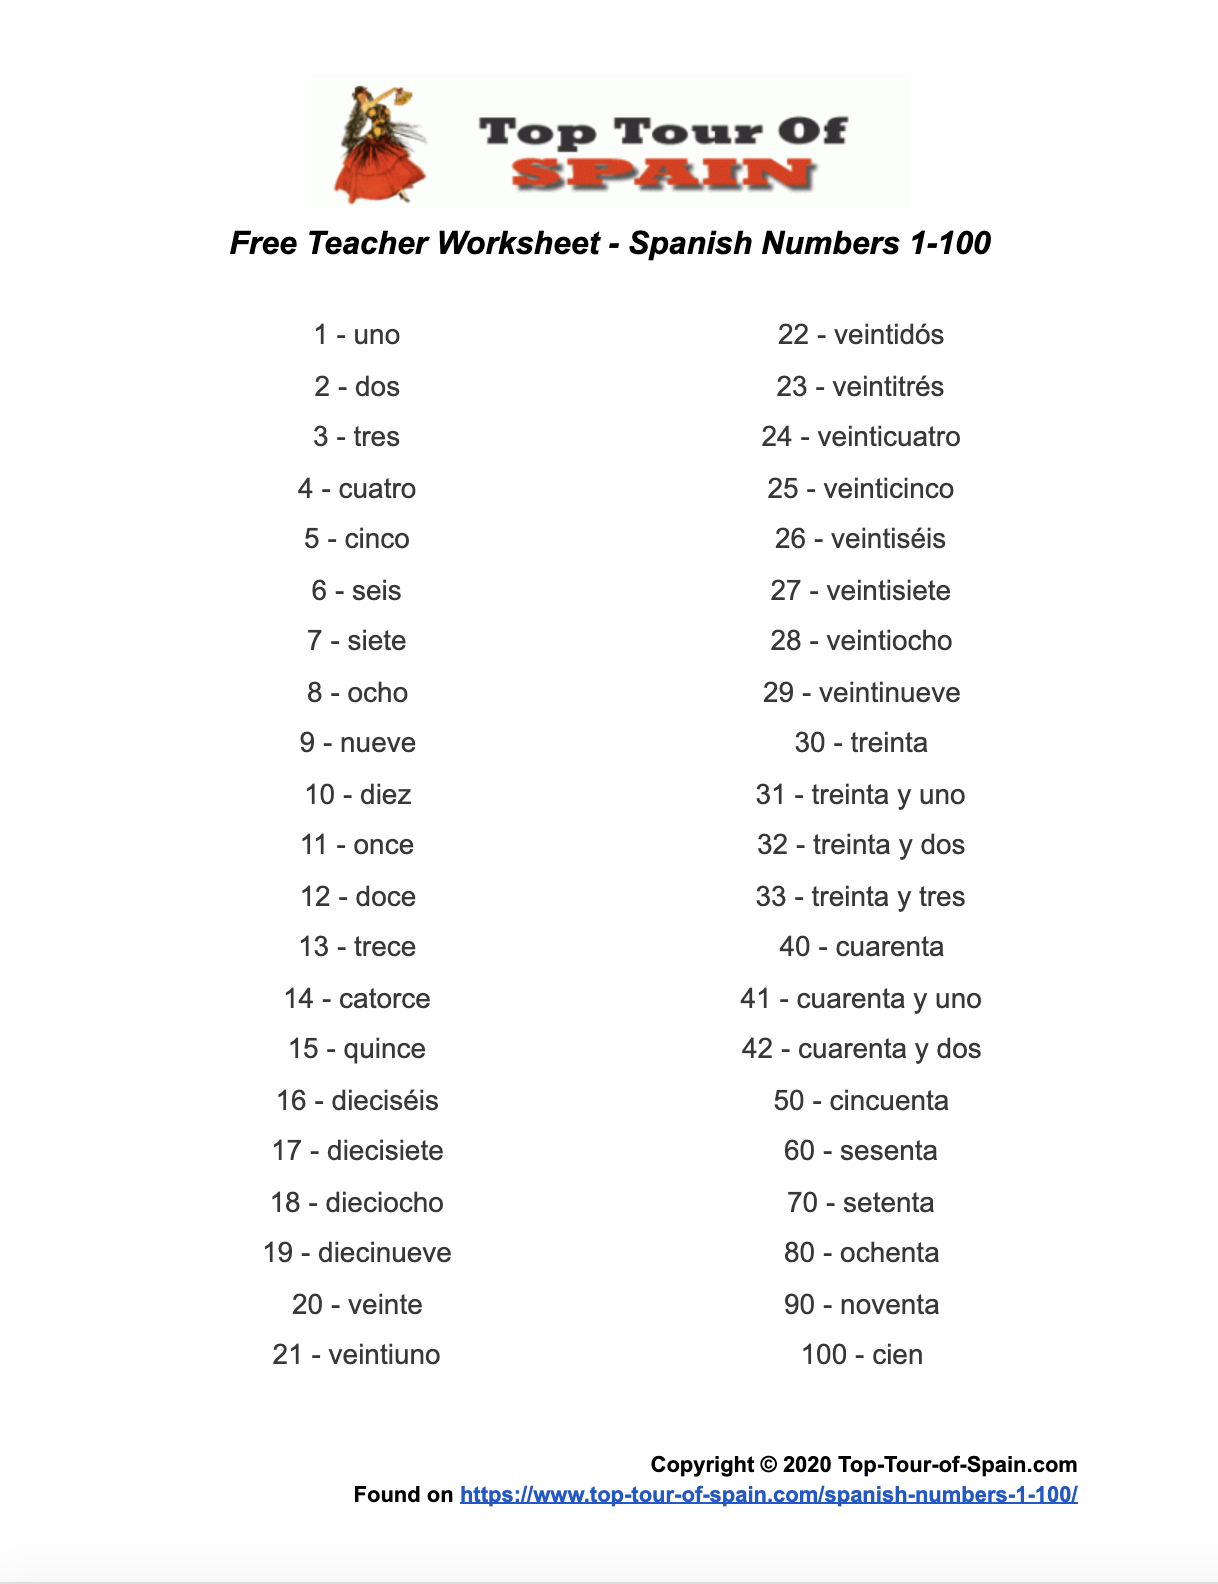 Spanish Numbers: Learn Numbers in Spanish 5-500 - Top Tour of Spain